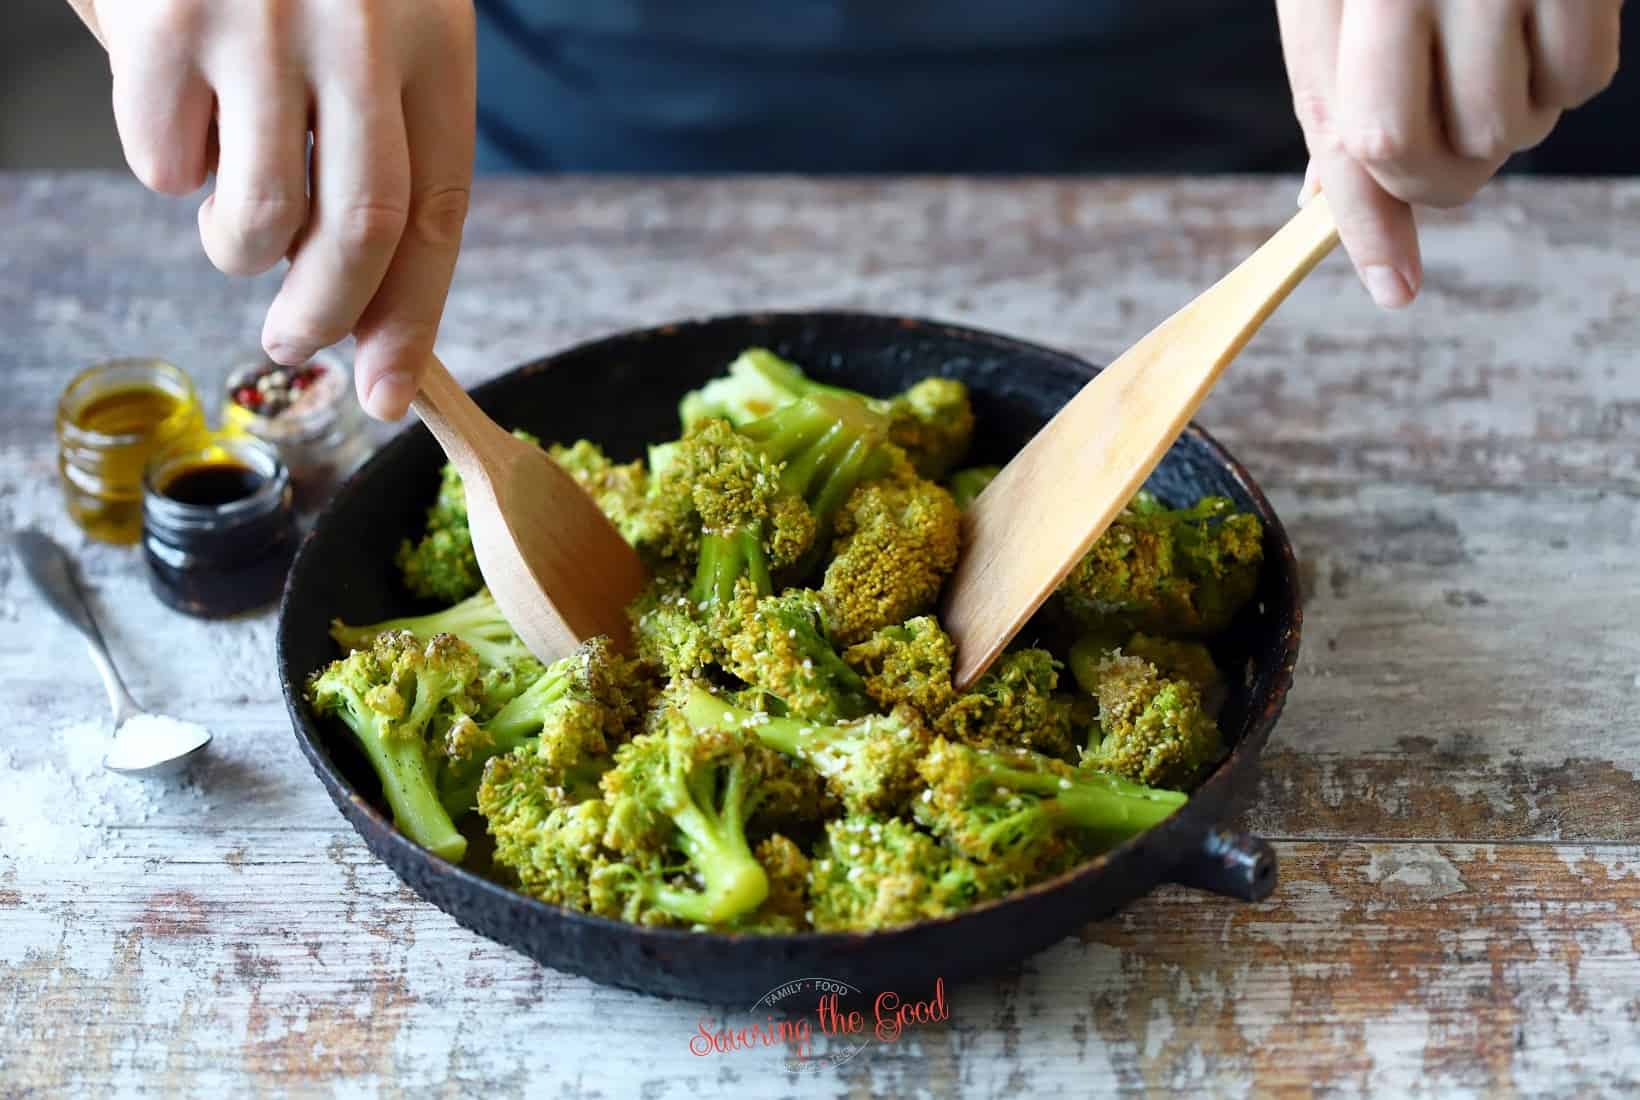 A person using wooden spoons to stir broccoli in a pan. xi lan hua